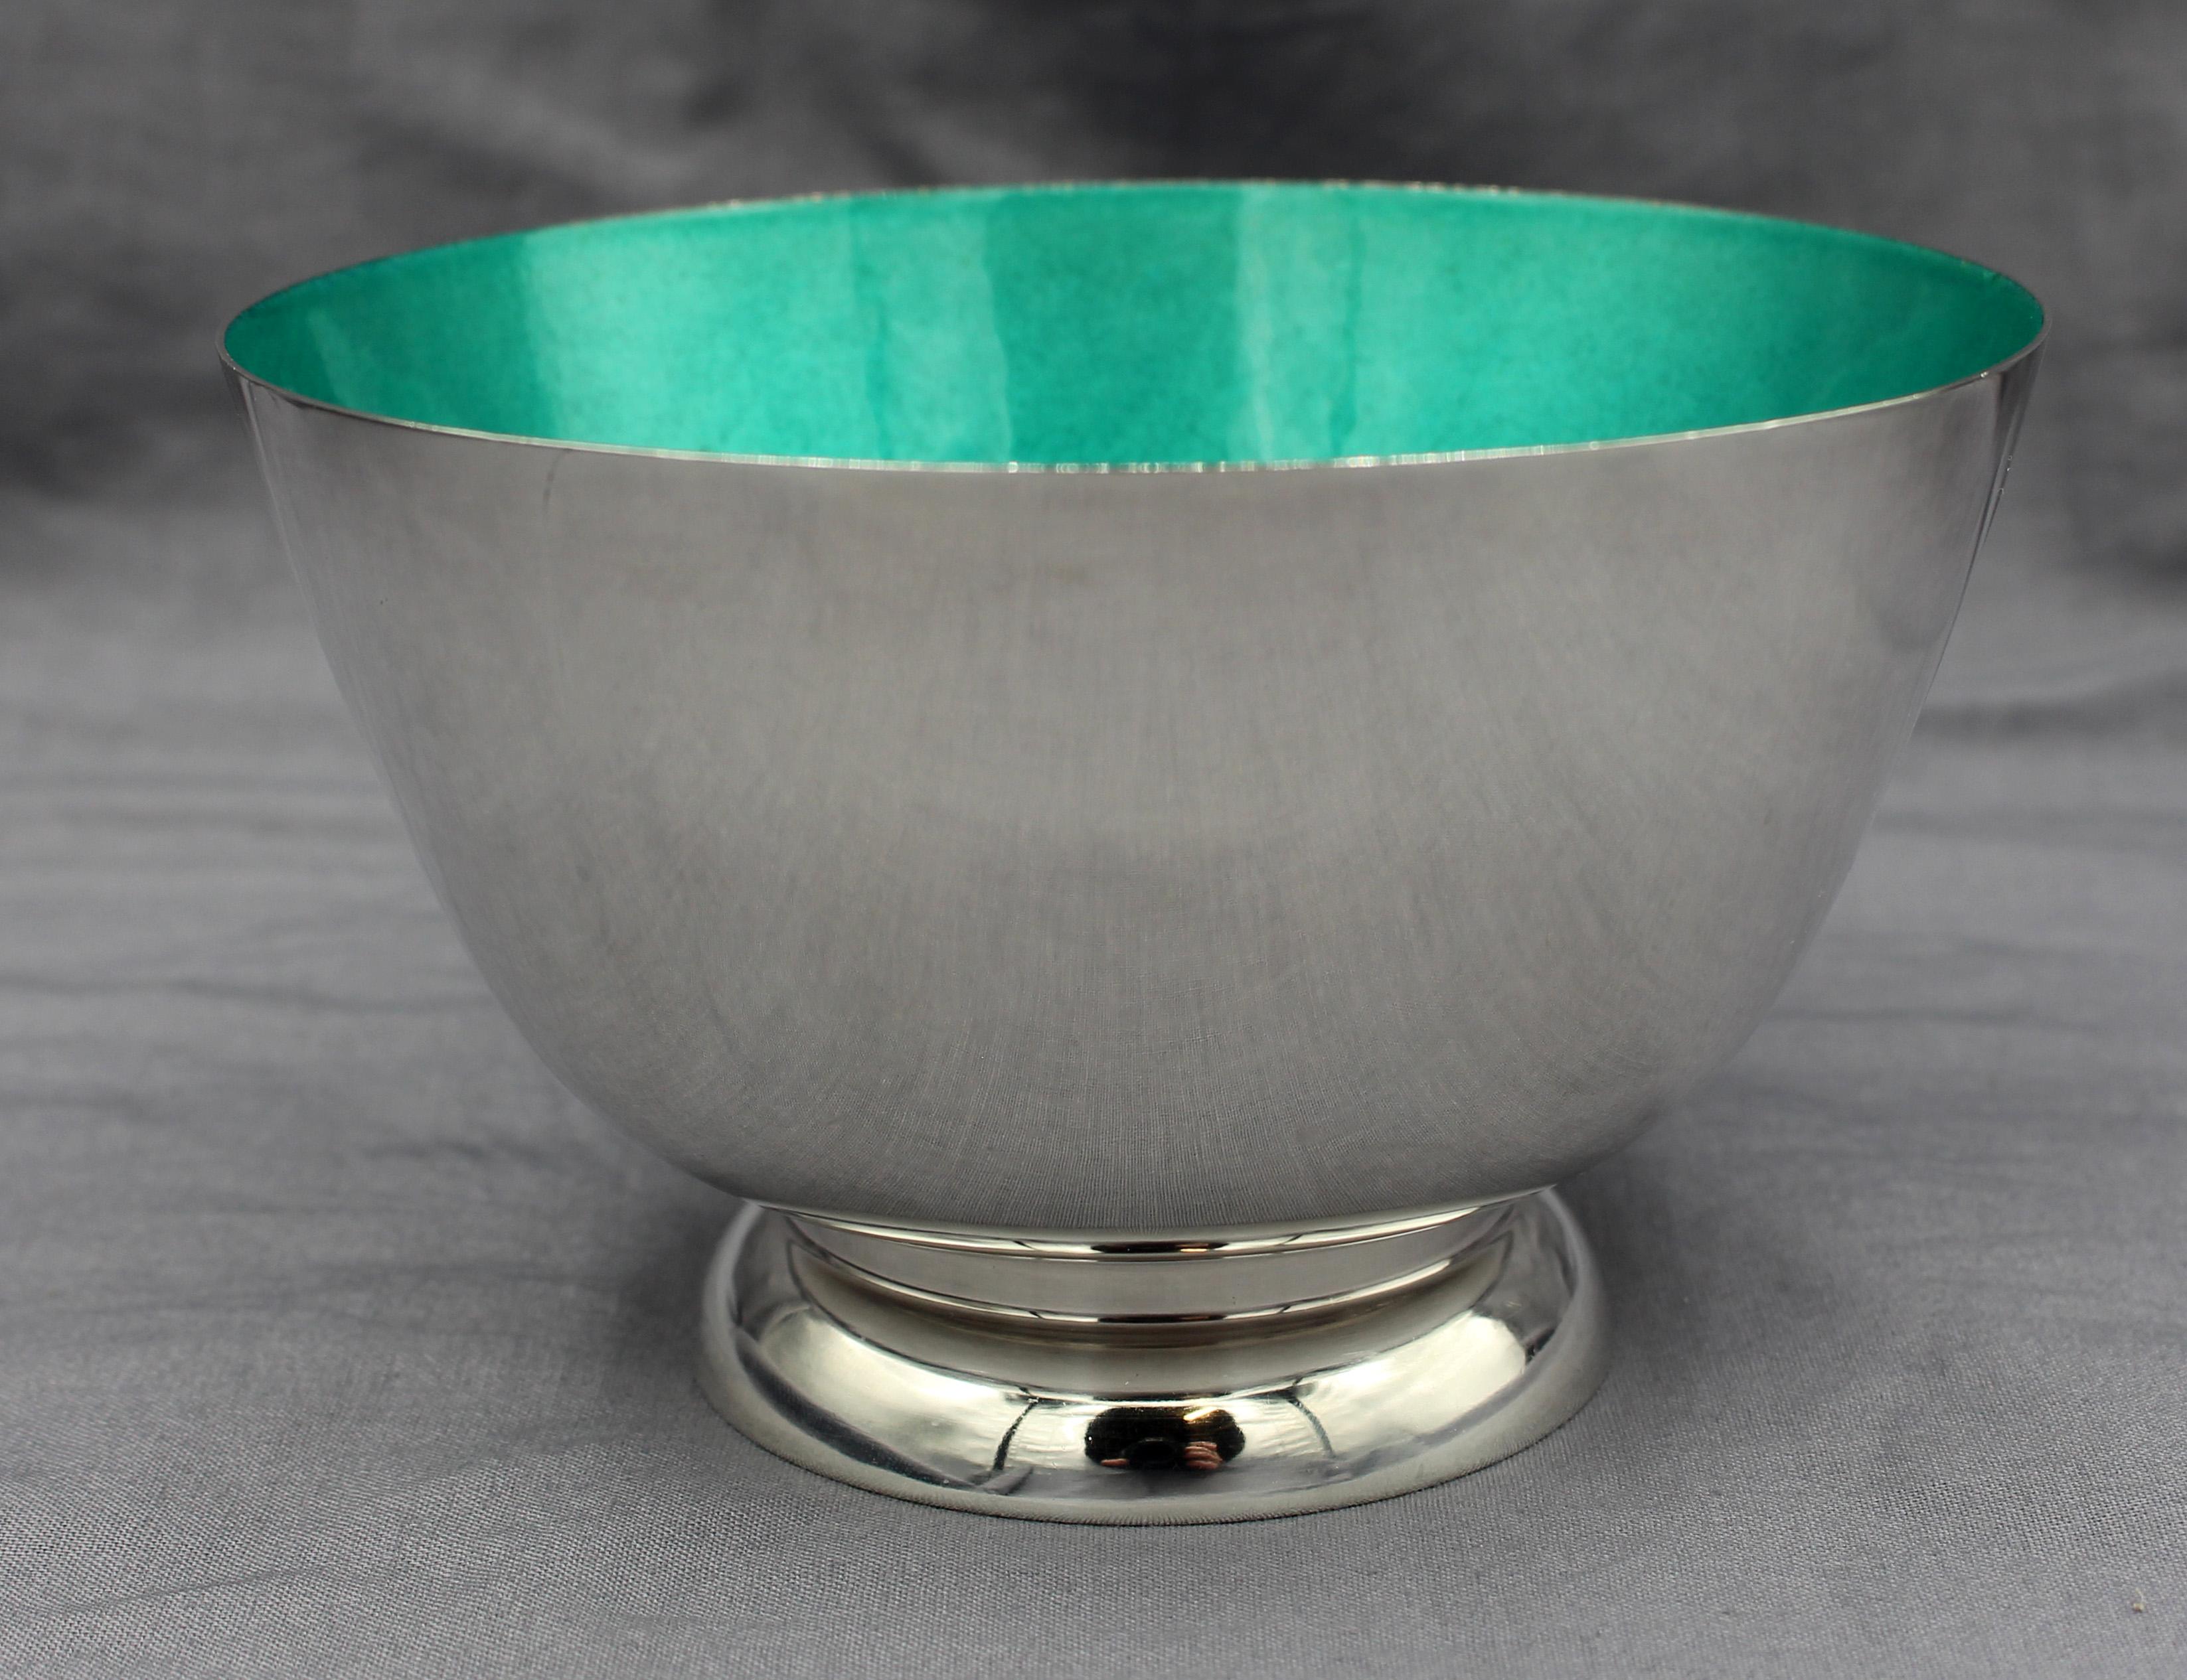 Turquoise enameled sterling silver bowl by Towle, mid century modern. Elegant; never engraved. 7.05 troy oz.
5